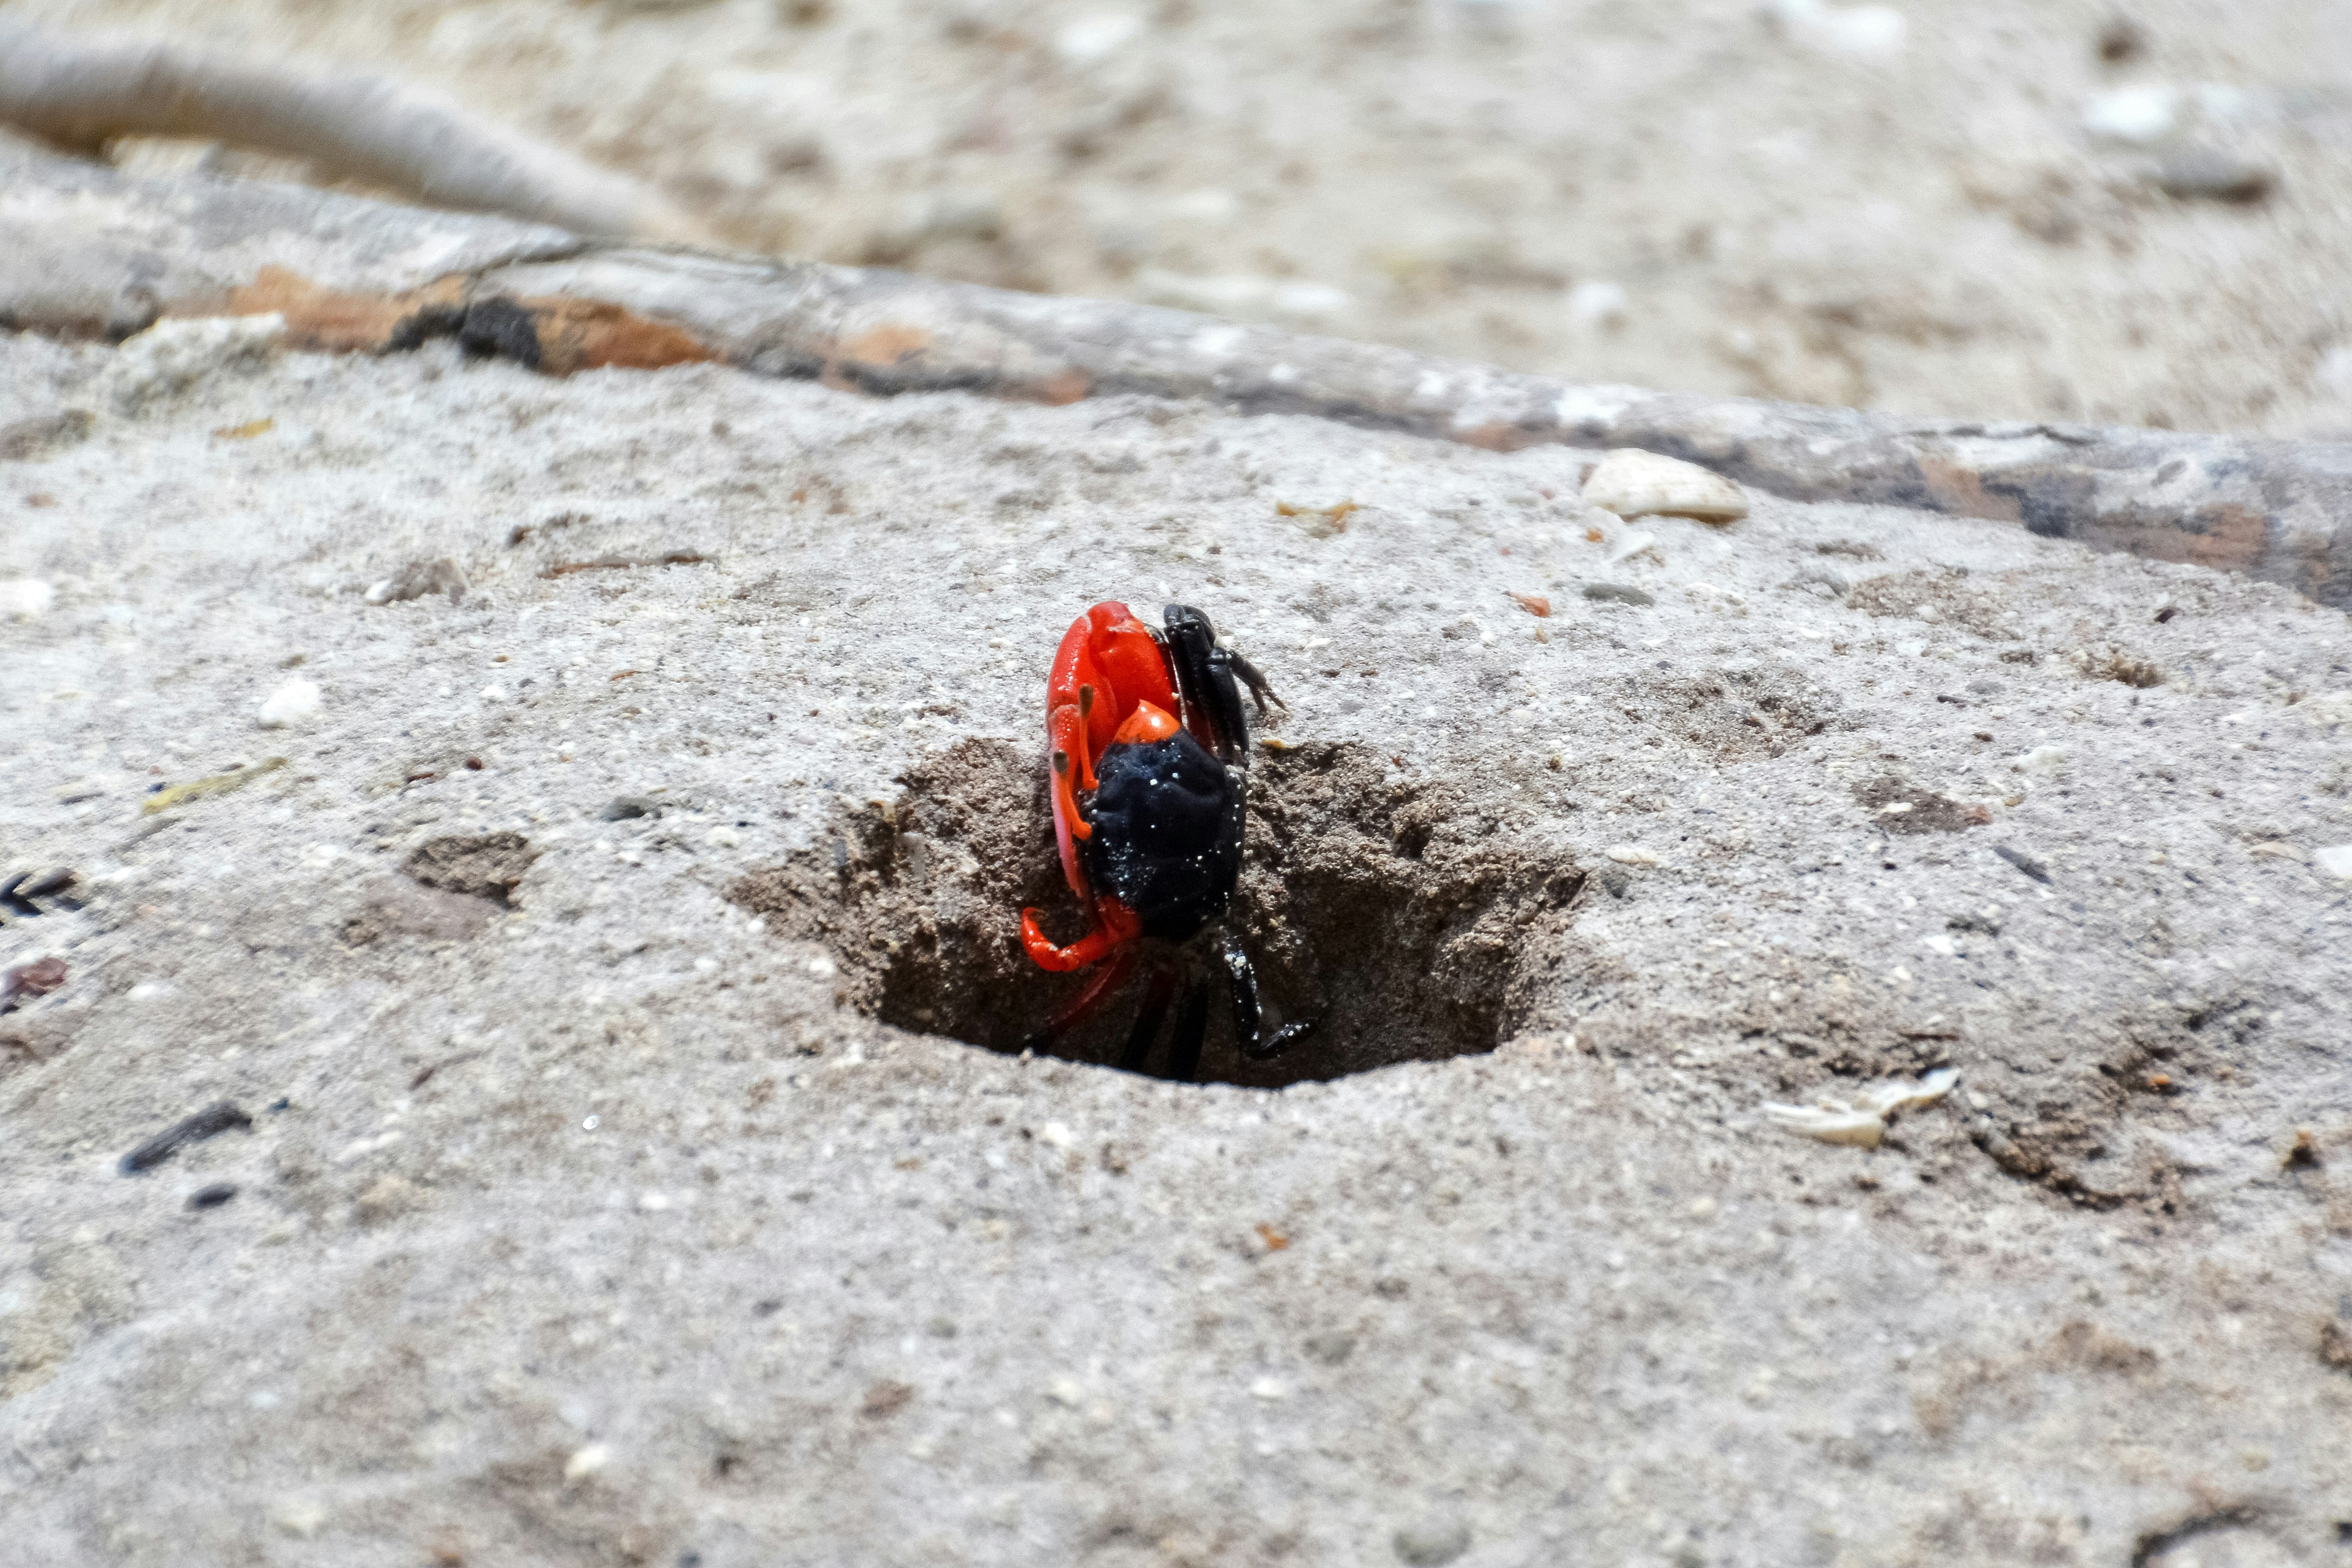 red and black beetle on brown soil during daytime